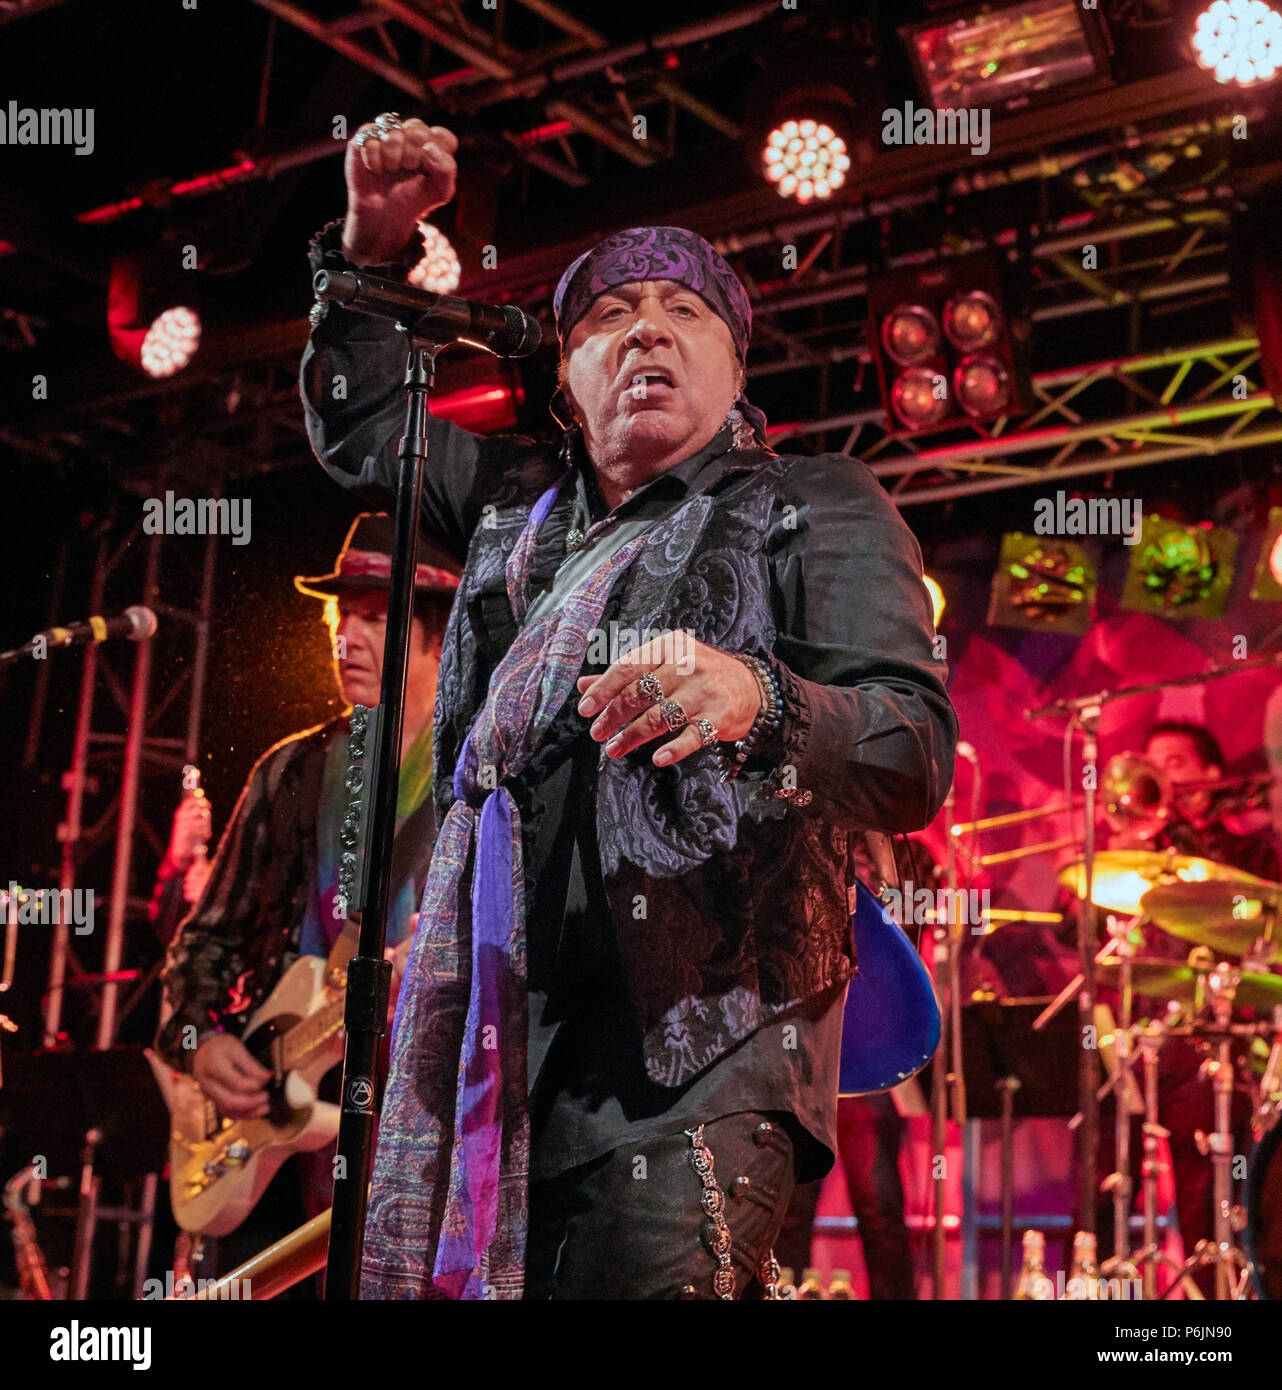 June 30, 2018 - STEVIE VAN ZANDT, Bruce Springsteen E Street Band member, The Sopranos & Lilyhammer actor perfoming as leader of Little Steven and the Disciples of Soul during their 'The Soulfire Teachrock Tour', Live at the o2 Academy, Liverpool UK Credit: Andy Von Pip/ZUMA Wire/Alamy Live News Stock Photo